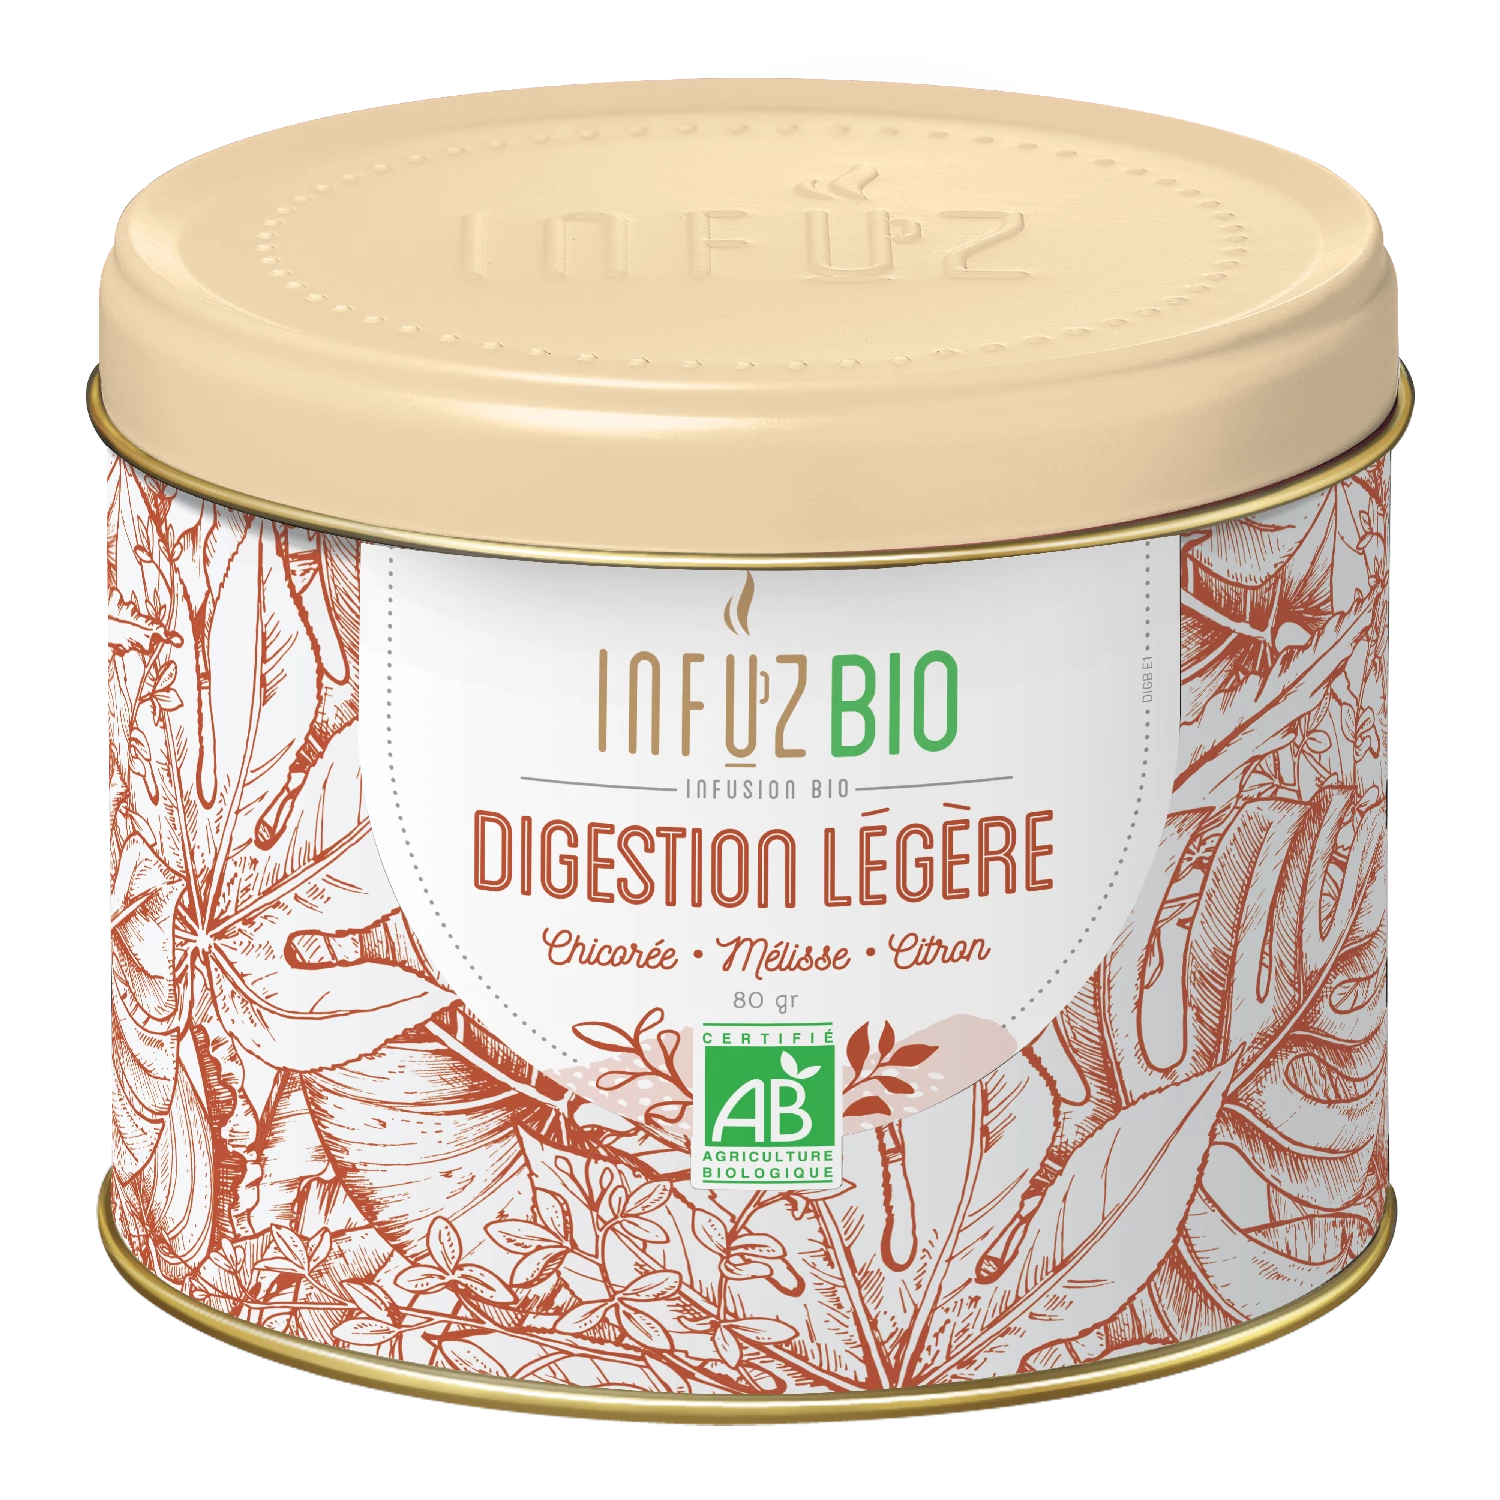 Infusion Dig Legere Bio 80g